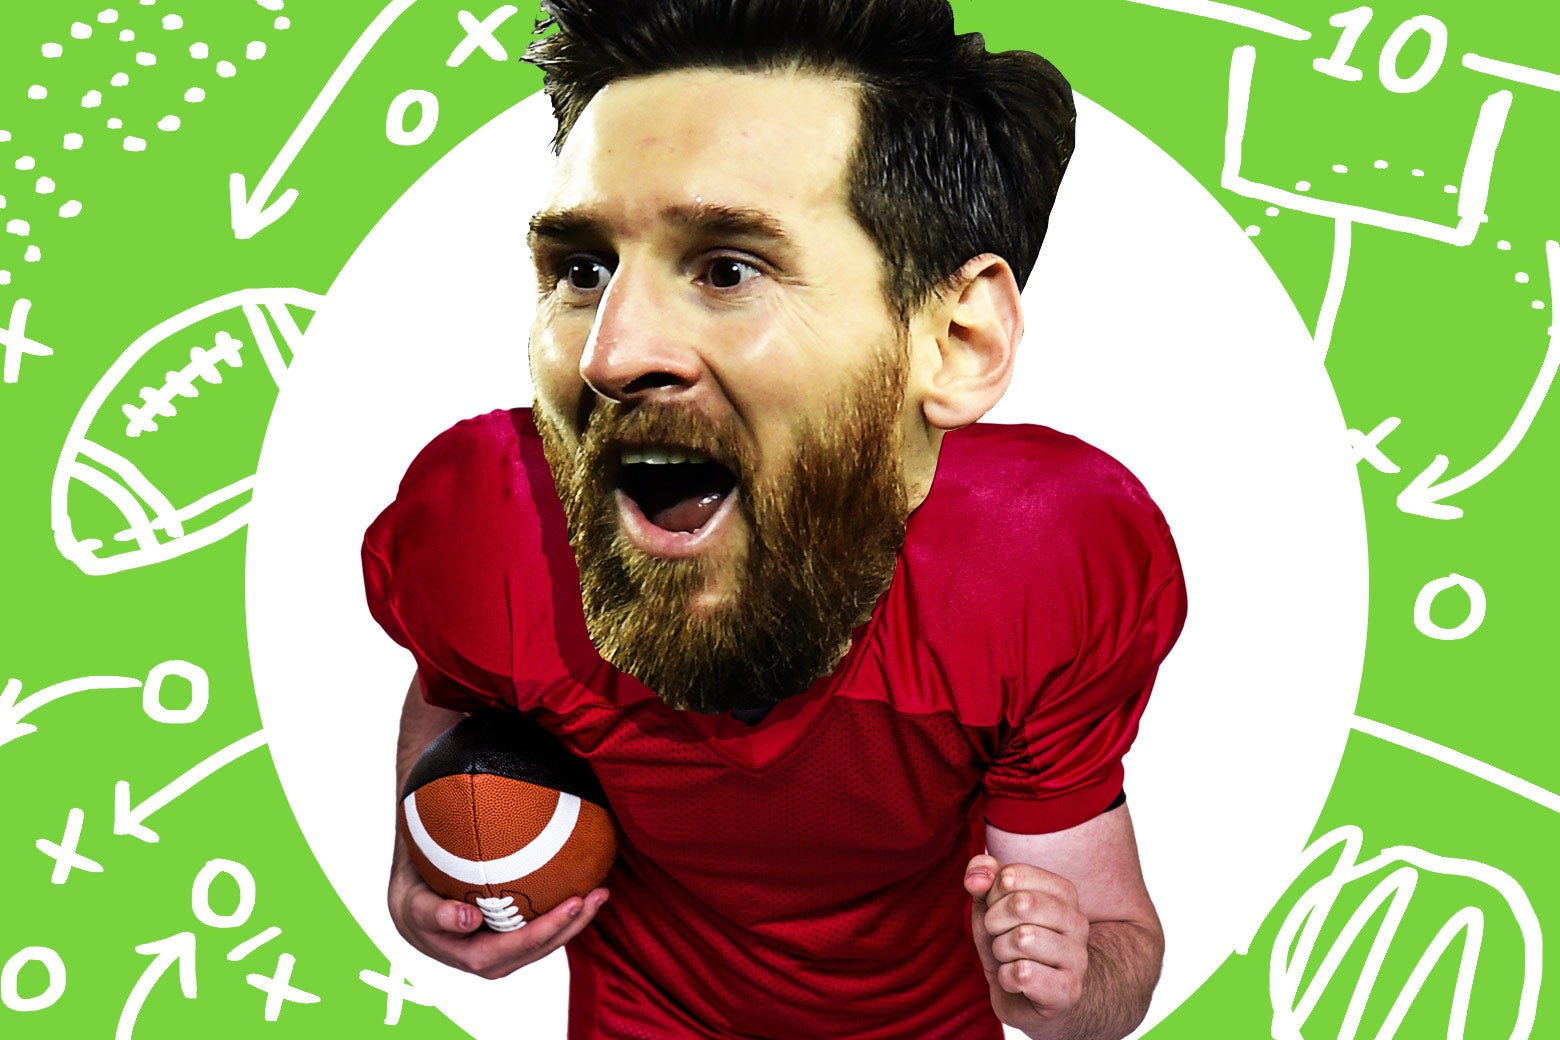 Could Leo Messi play running back in the NFL?